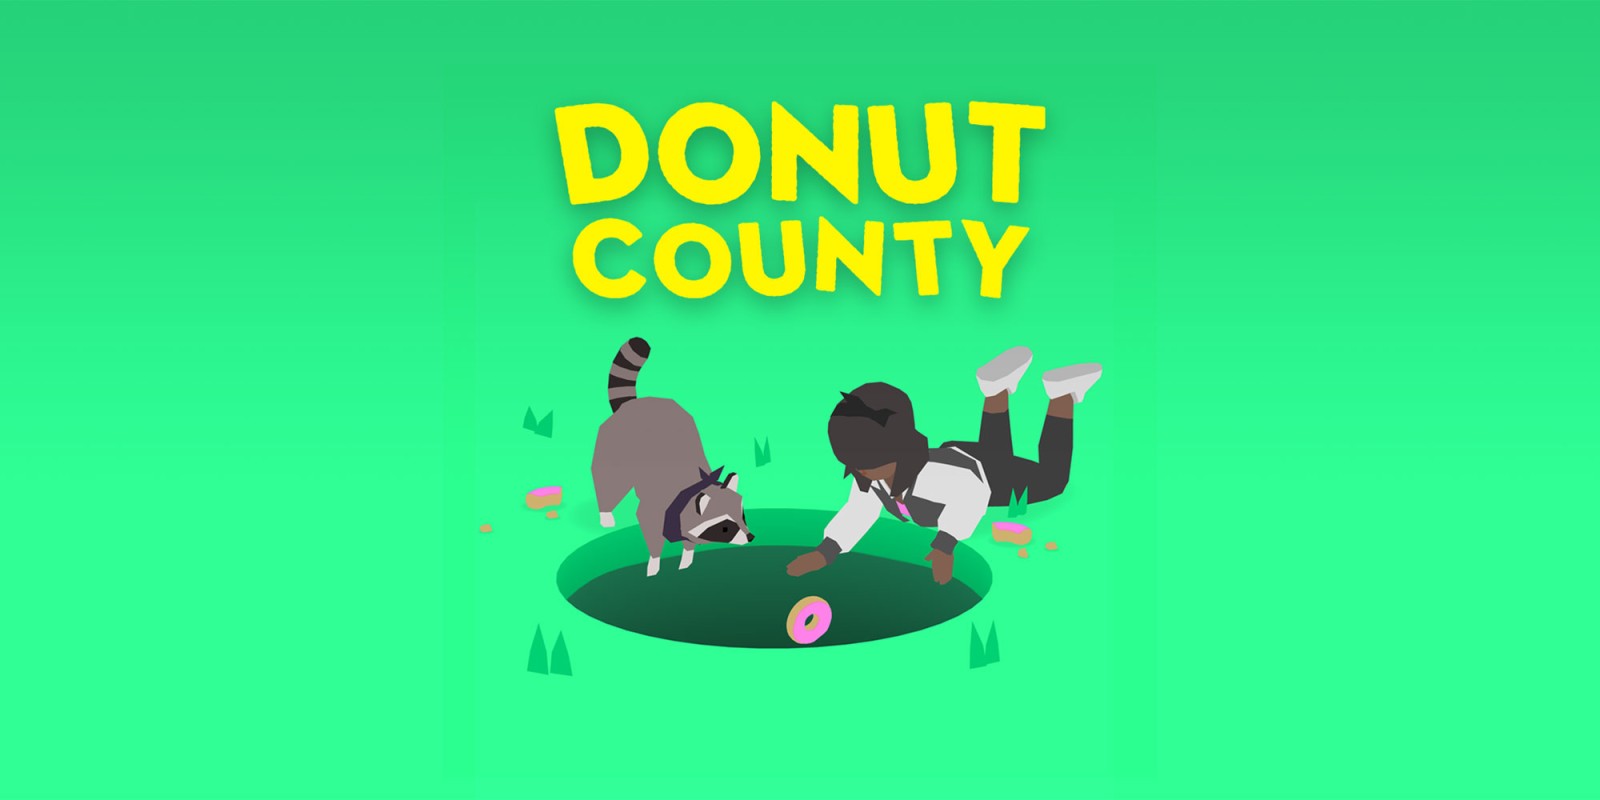 download donut country game for free